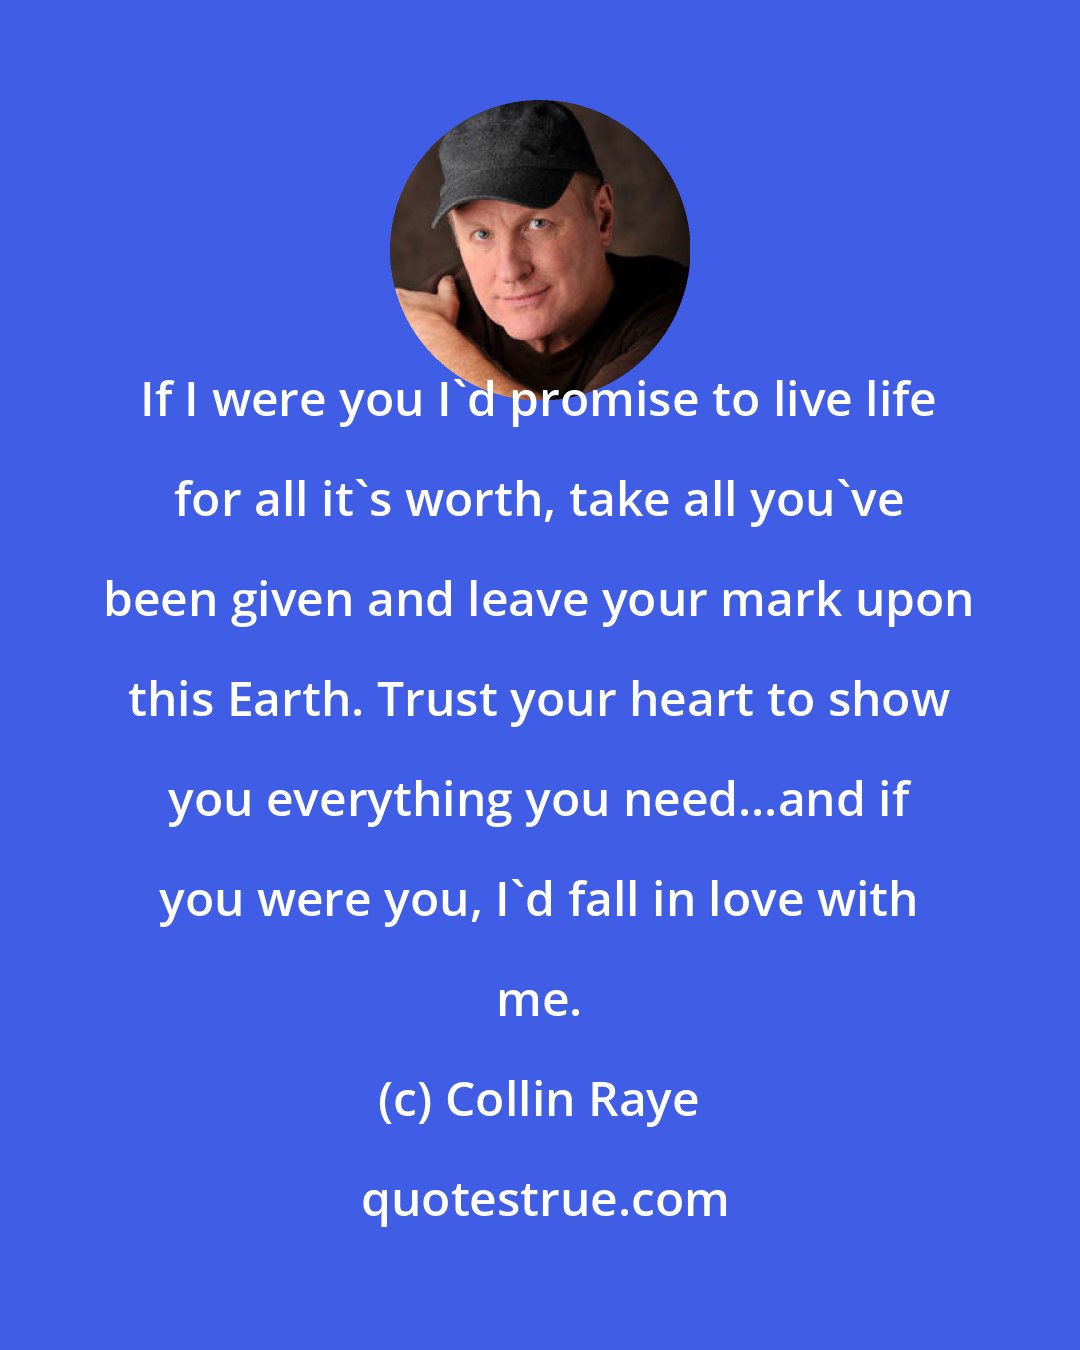 Collin Raye: If I were you I'd promise to live life for all it's worth, take all you've been given and leave your mark upon this Earth. Trust your heart to show you everything you need...and if you were you, I'd fall in love with me.